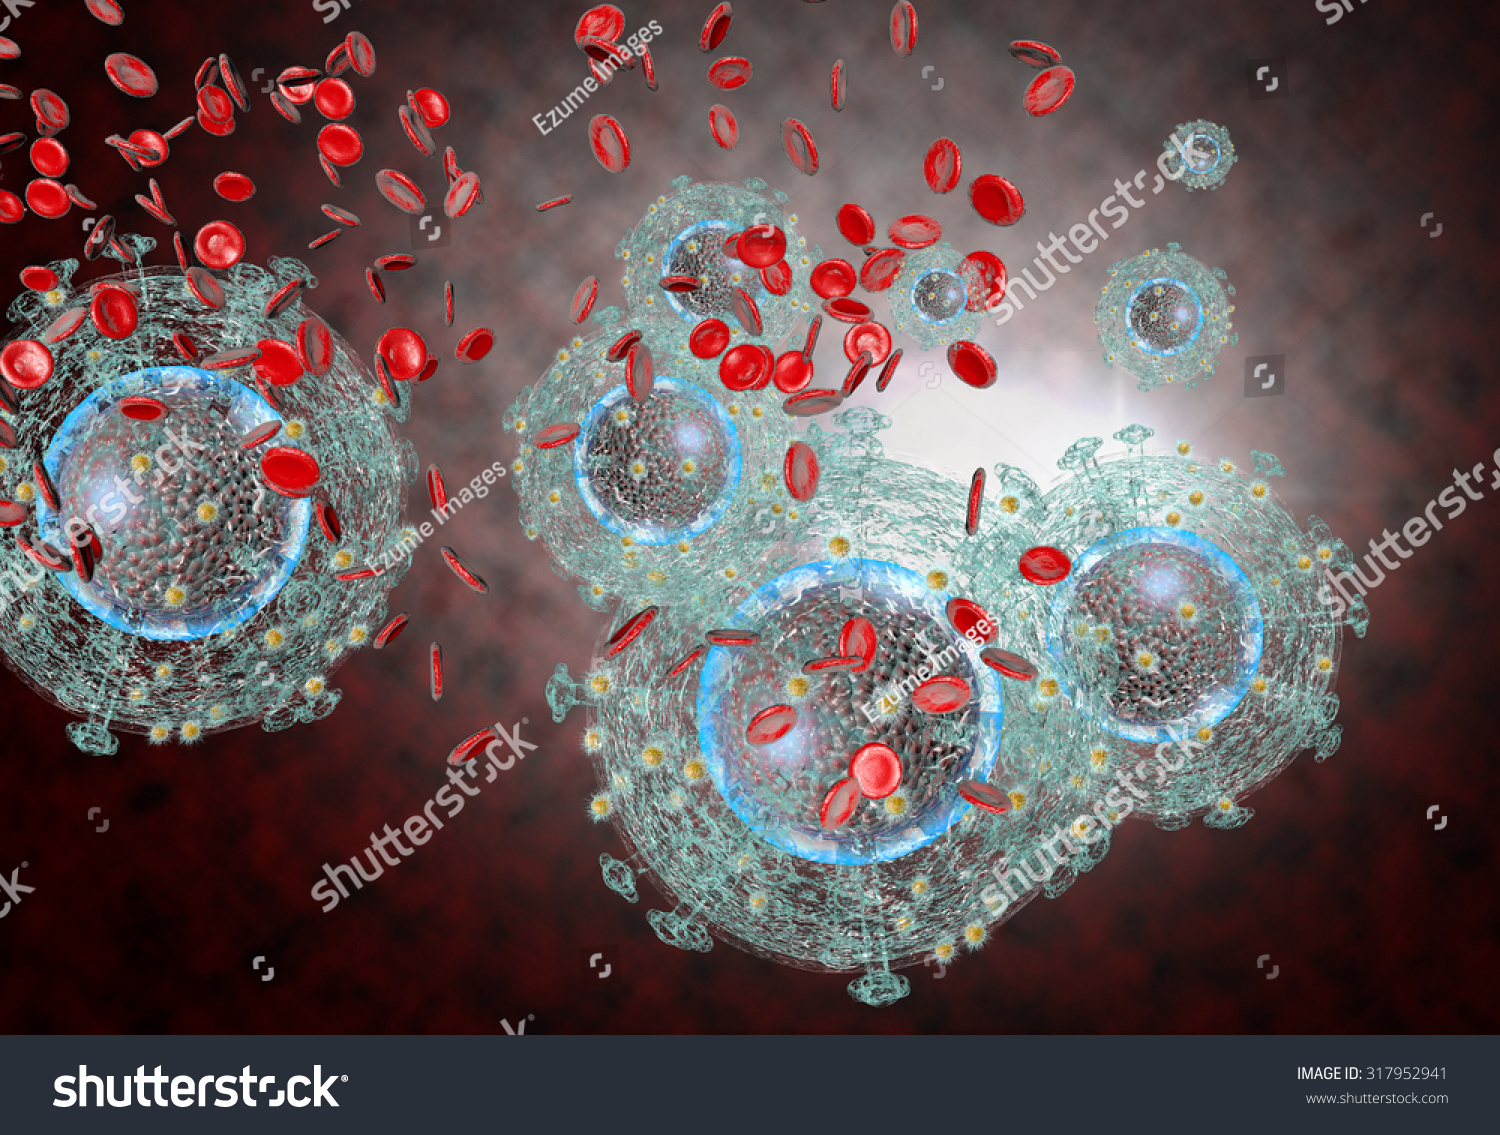 3d Generated Illustration Of Hiv Aids Virus Cells For Medical Science ...